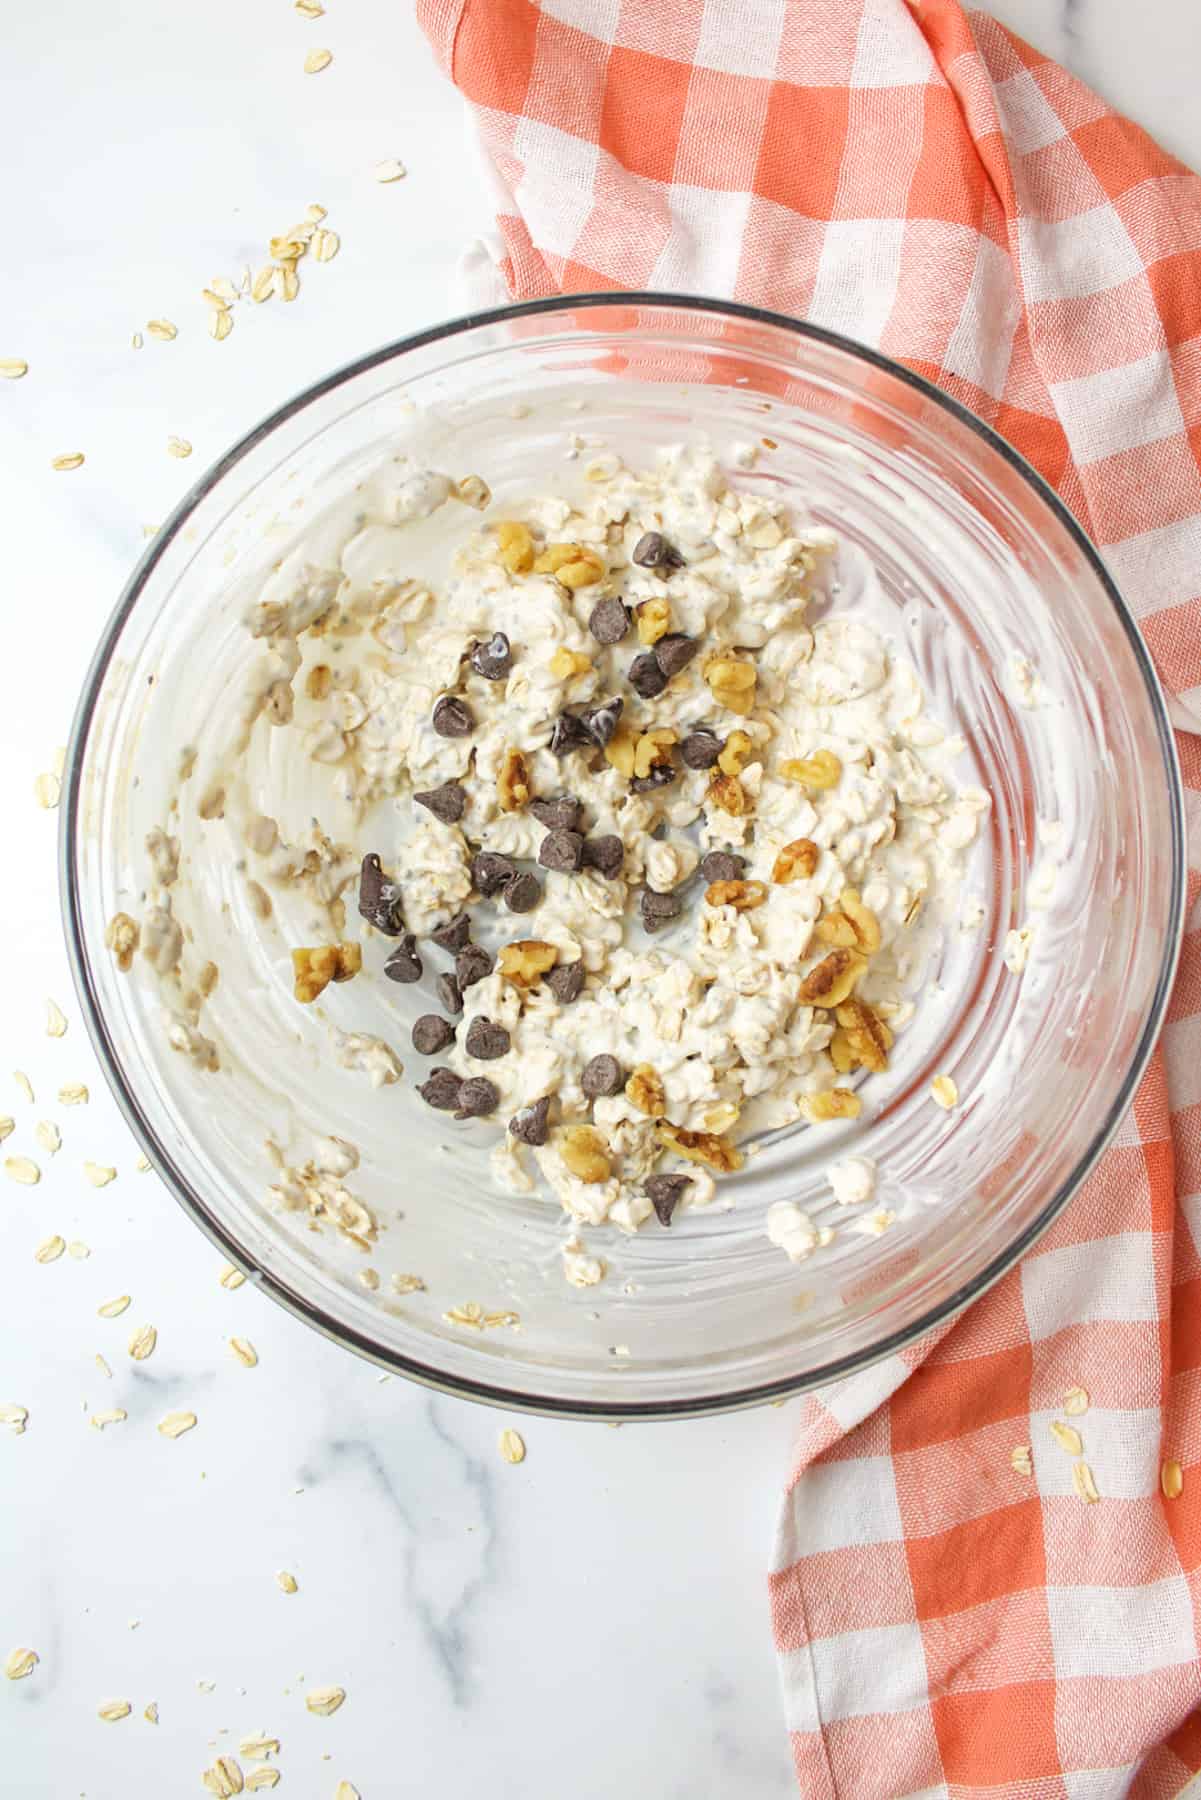 overnight oats mixture with walnuts and chocolate chips in a bowl.